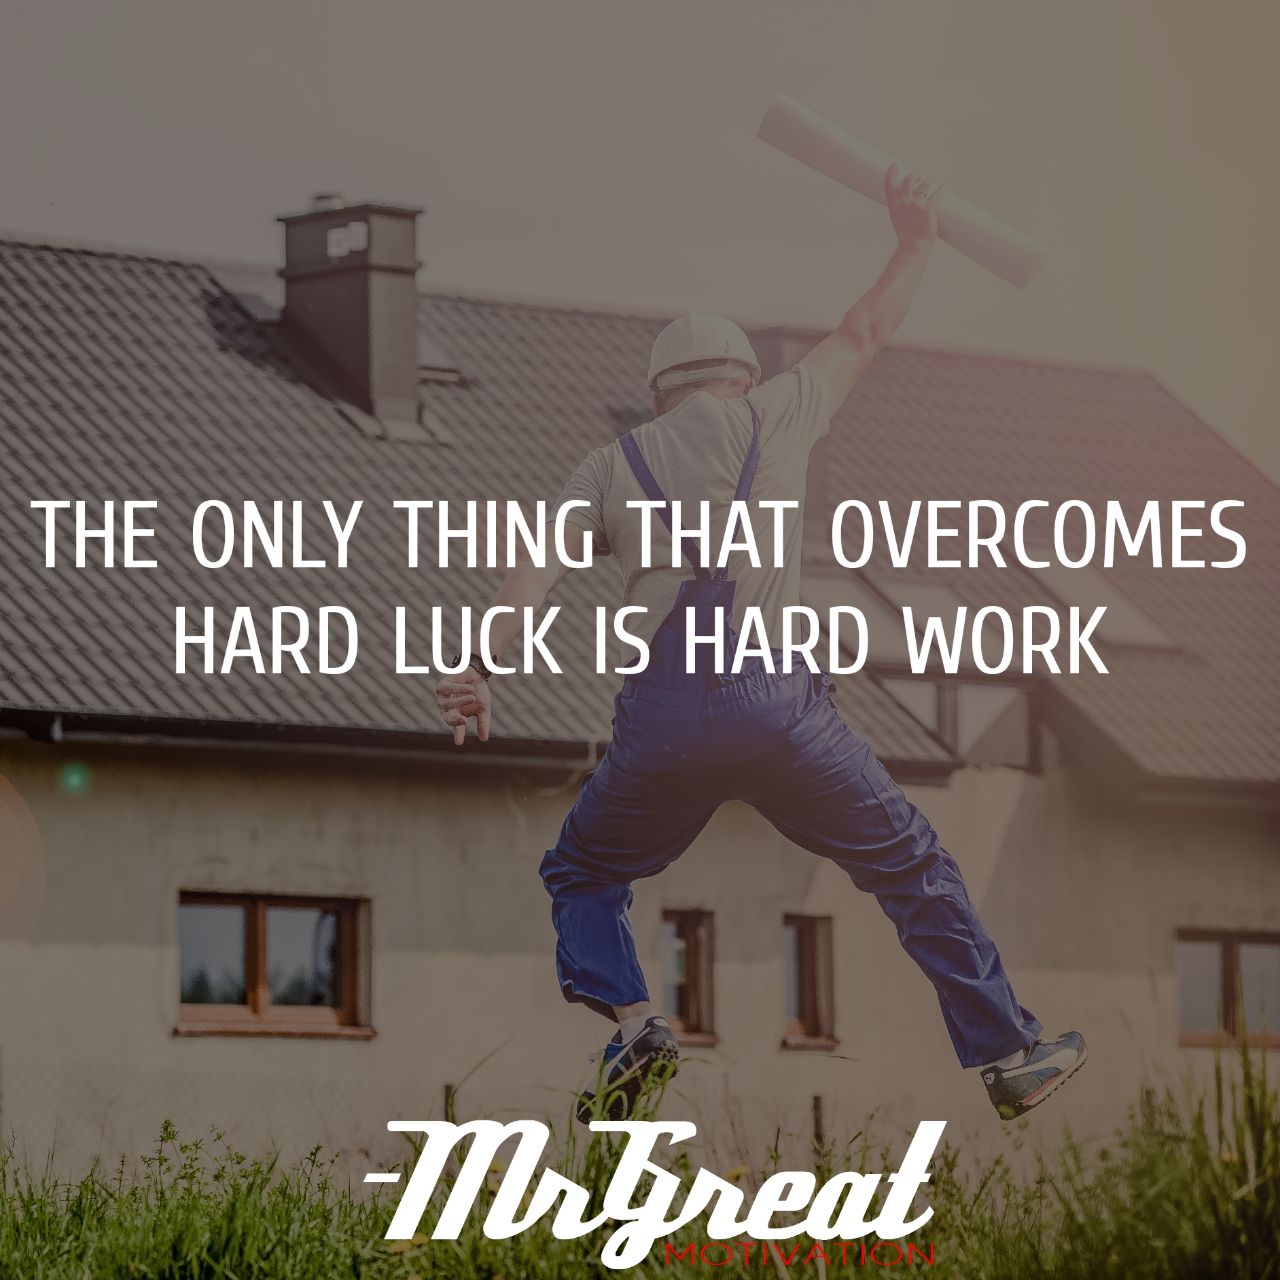 The Only thing that overcomes hard luck is hard work. - Harry Golden